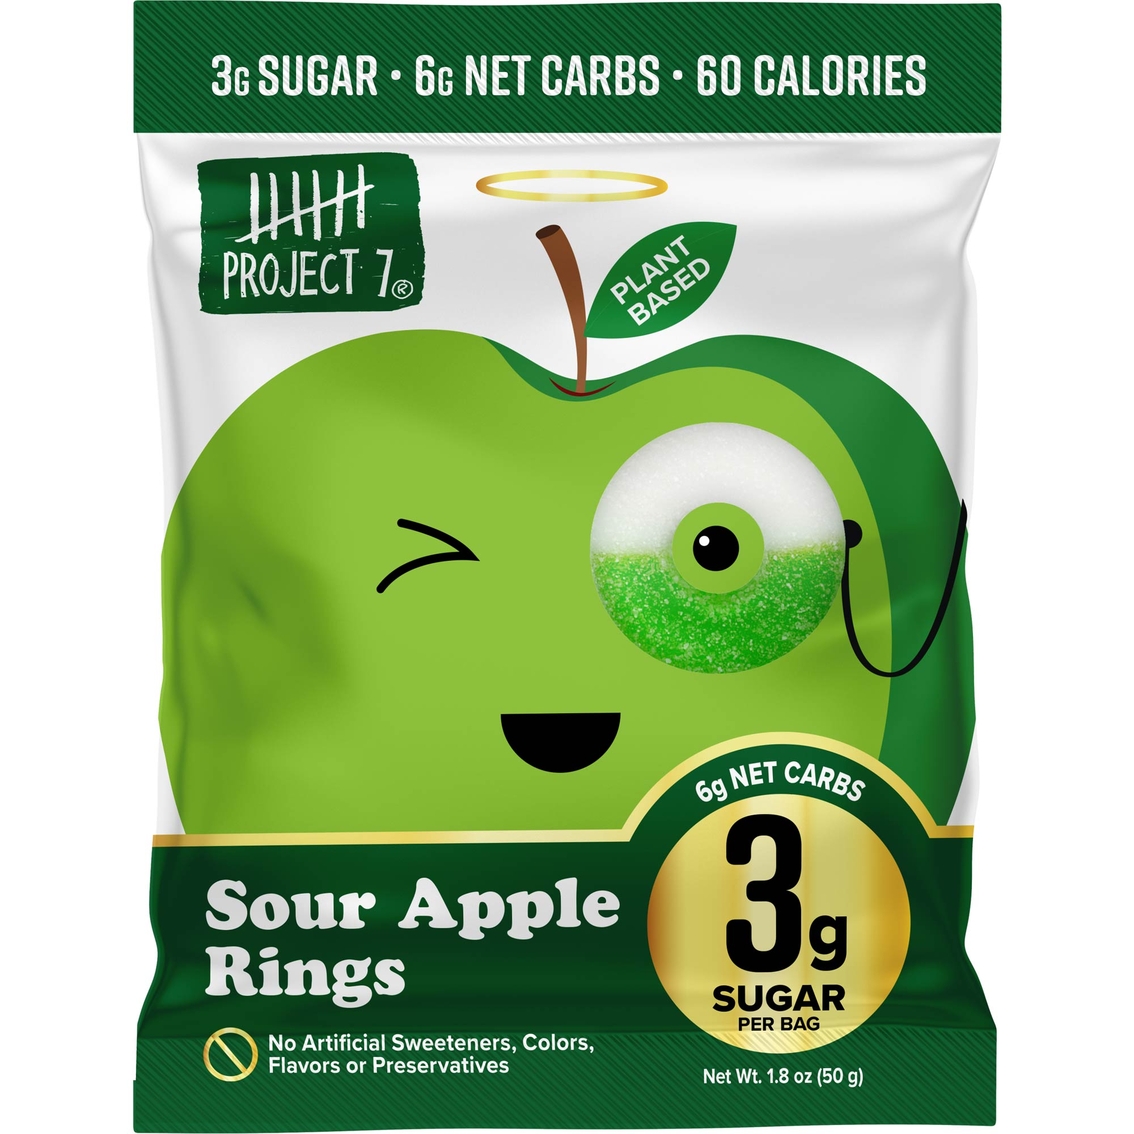 Project 7 Low Sugar Sour Apple Rings Candy - Image 1 of 2